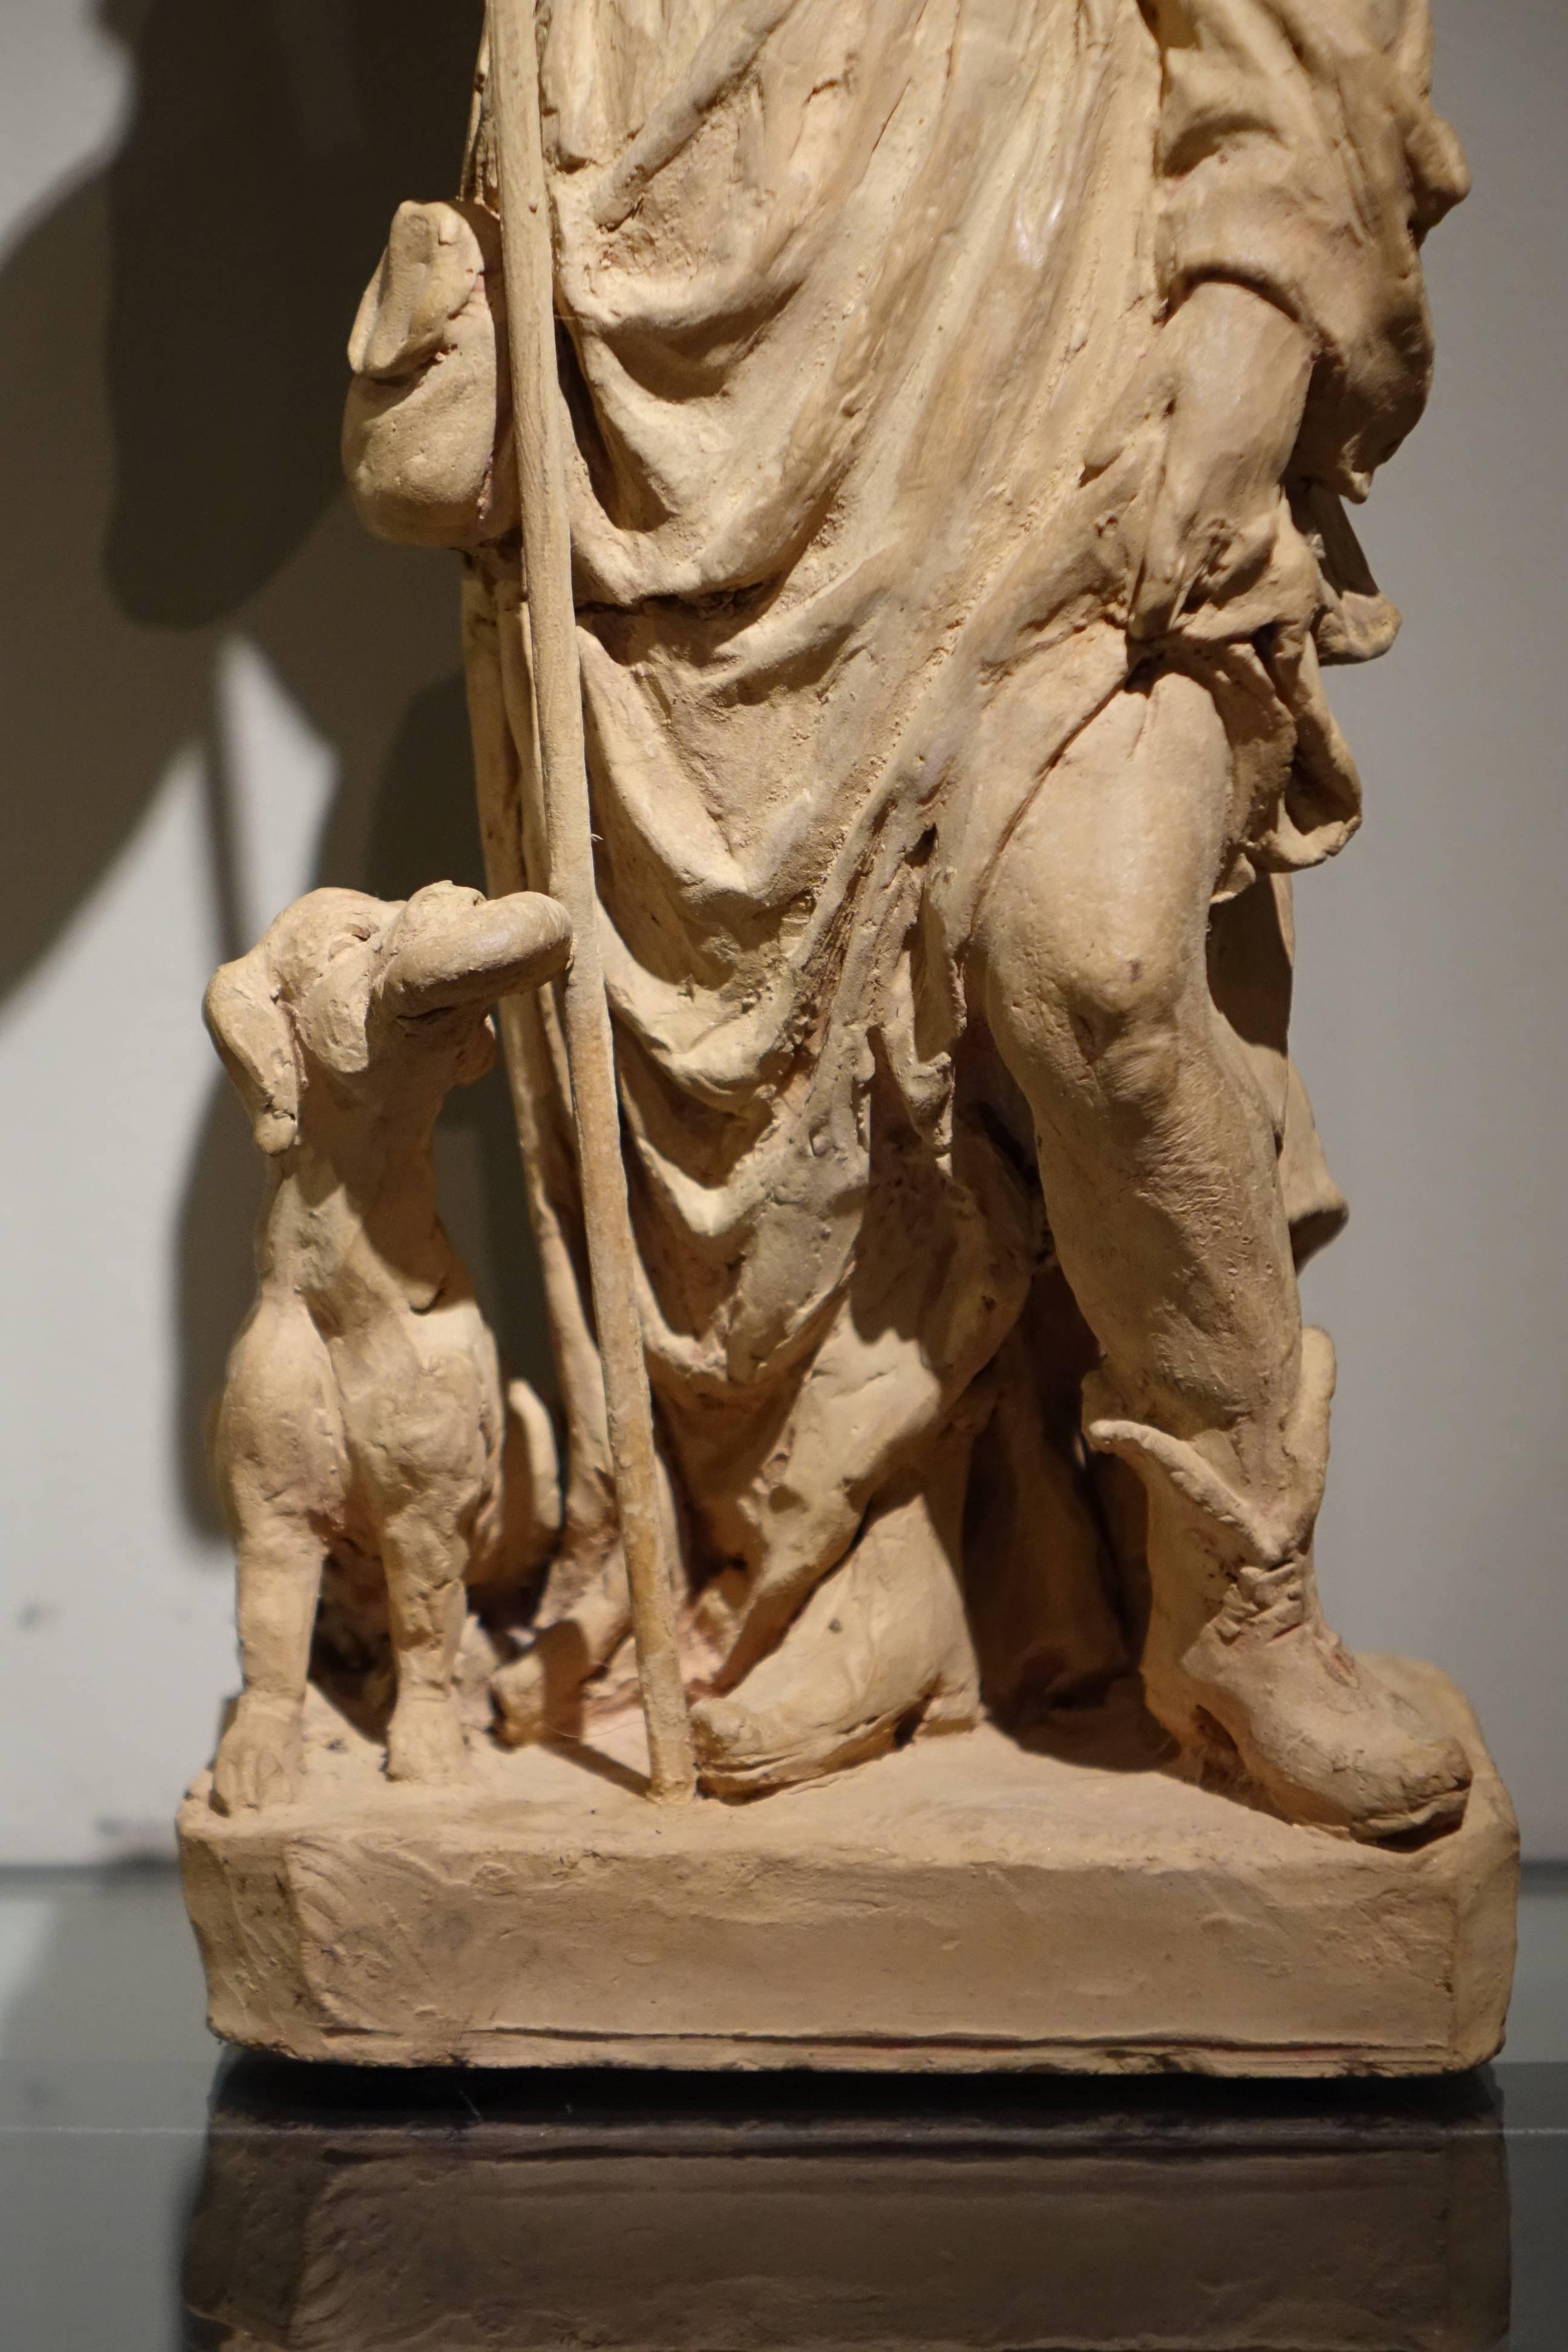 Saint Rocco, unique, original terracotta statue, France, 18th century
On his return from Rome in 1371, Saint Roch or Rocco suffered from the plague.
In order not to risk spreading the contagion, he retired in the woods, where he was fed by the dog